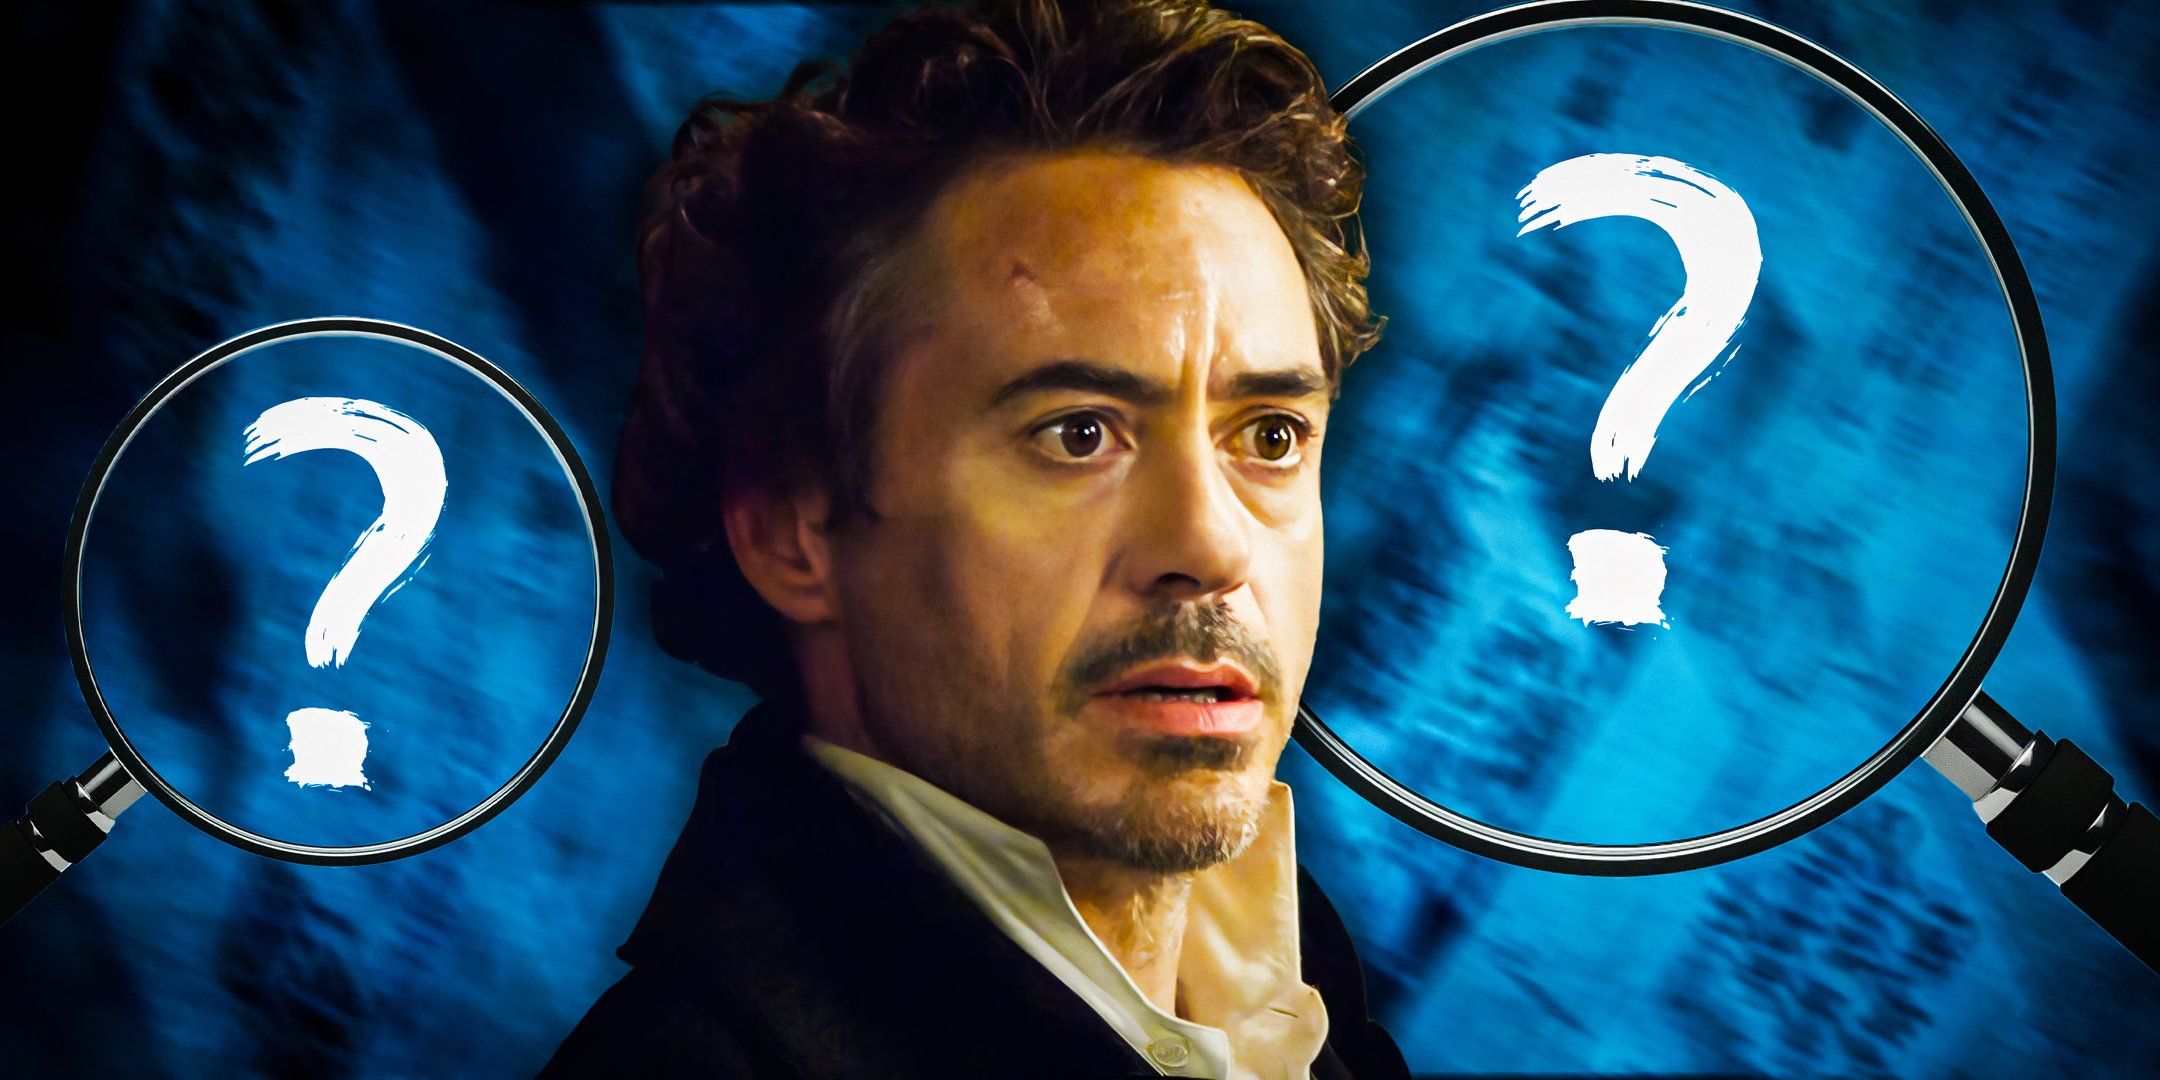 Could Robert Downey Jr. Appear In Guy Ritchie’s New Sherlock Holmes Series?